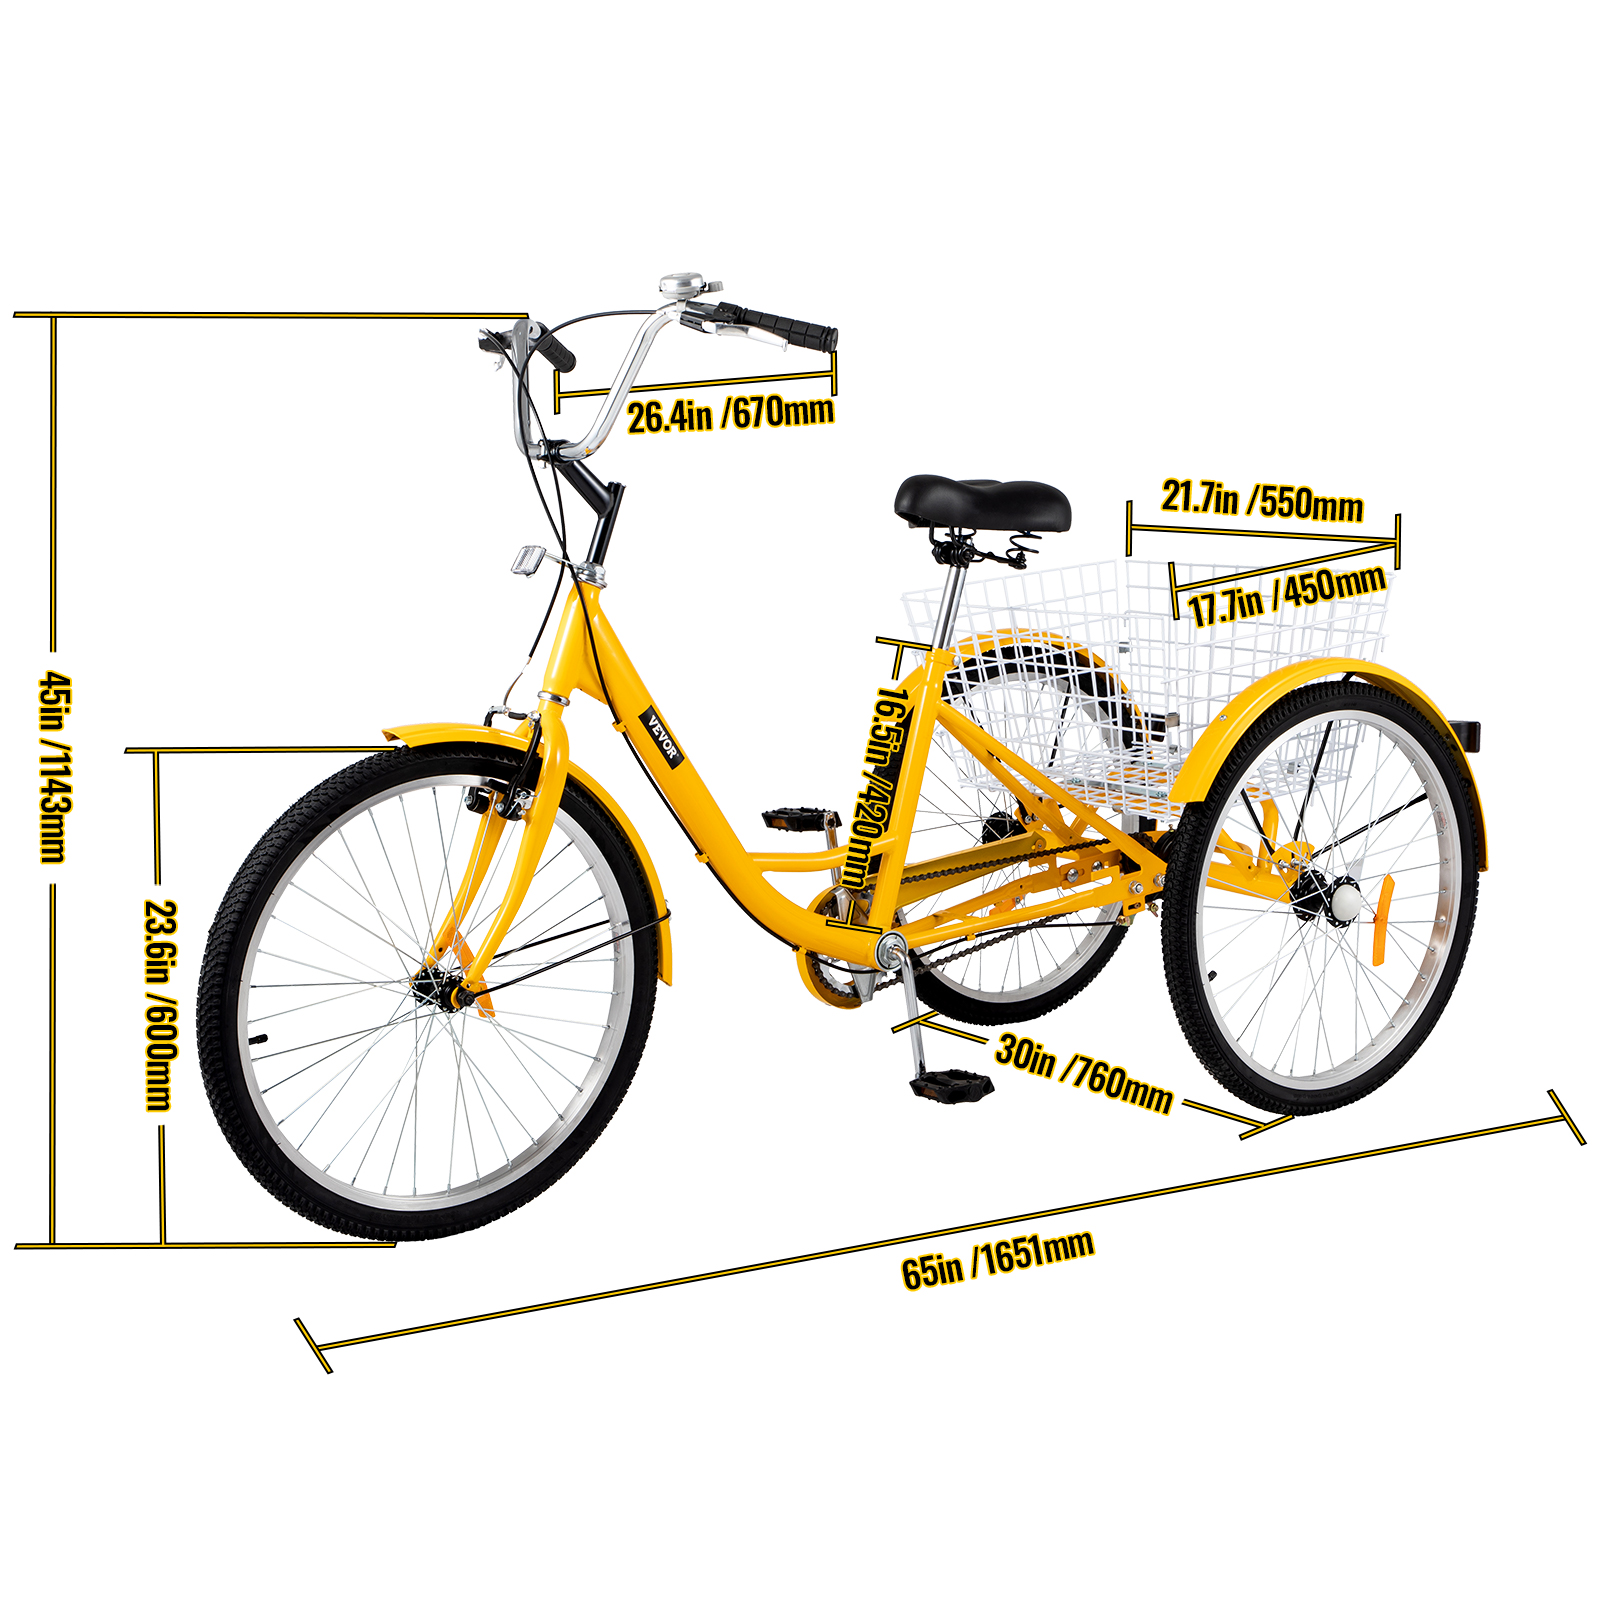 VEVOR Adult Tricycle 24 inch, 1-Speed Three Wheel Bikes , Yellow Tricycle with Bell Brake System, Bicycles with Cargo Basket for Shopping - image 8 of 9